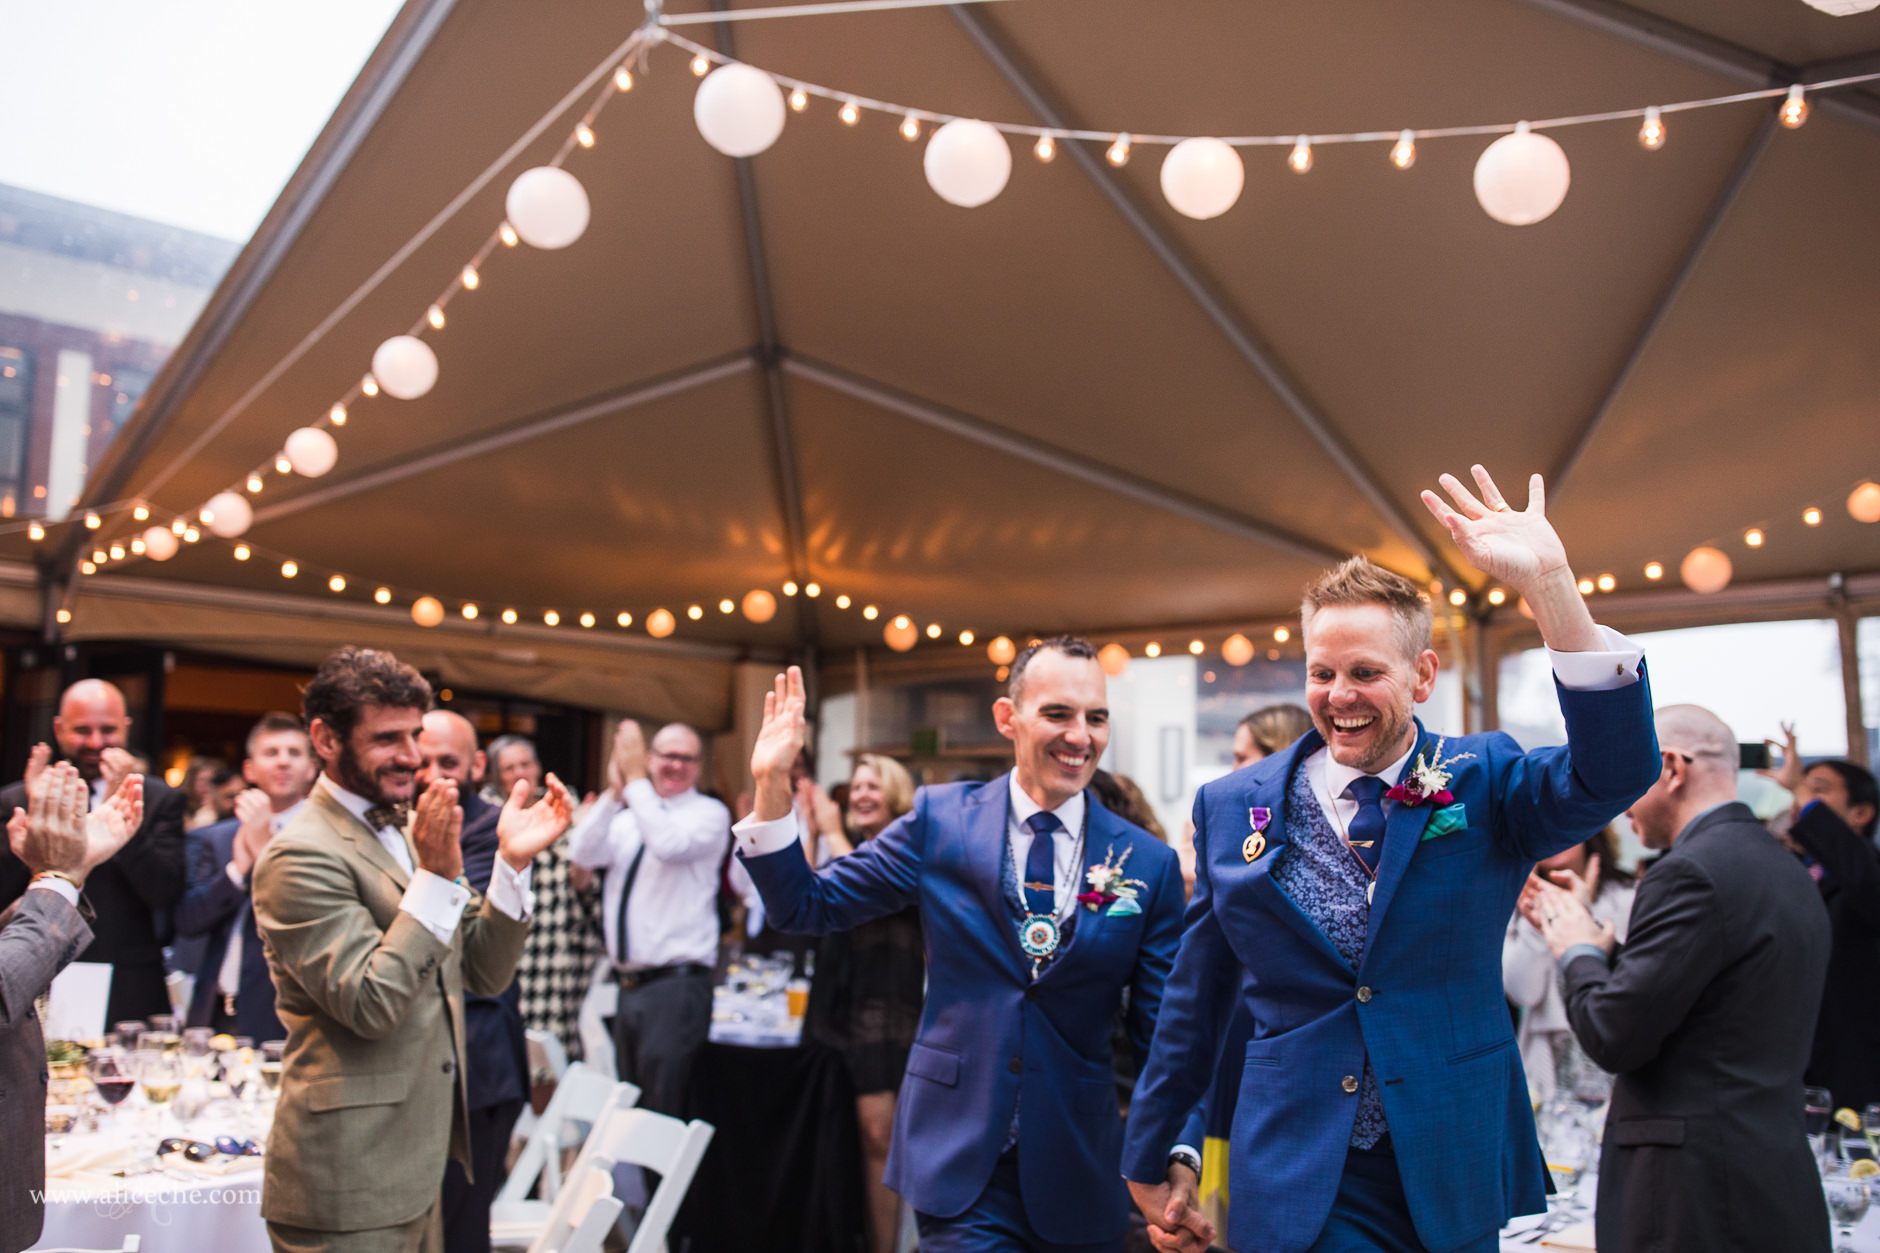 San Francisco Presidio Cafe Wedding Reception in Tent with String Lights and Lanterns